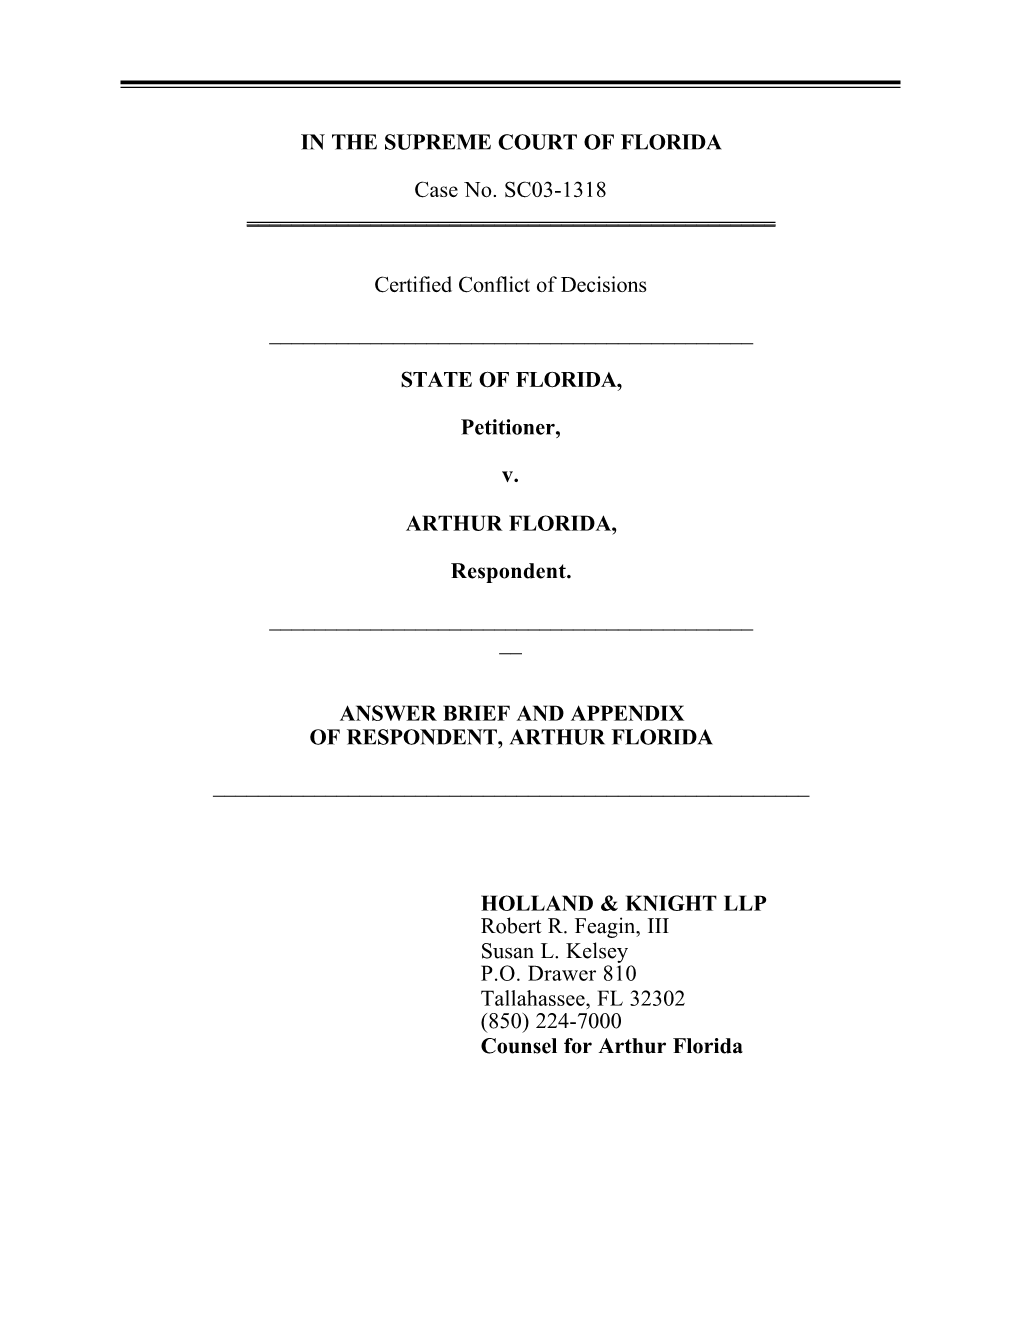 In the Supreme Court of Florida